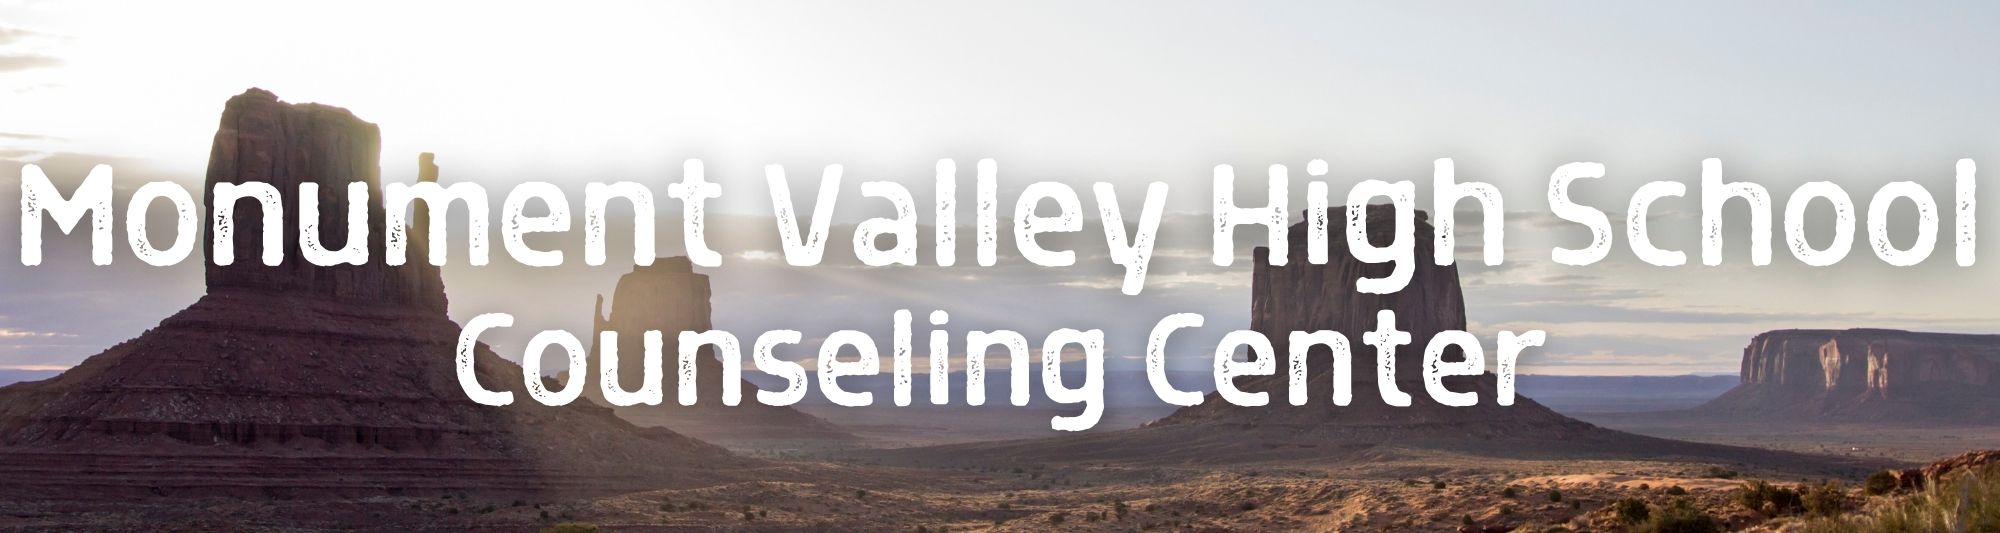 Monument Valley counseling center text